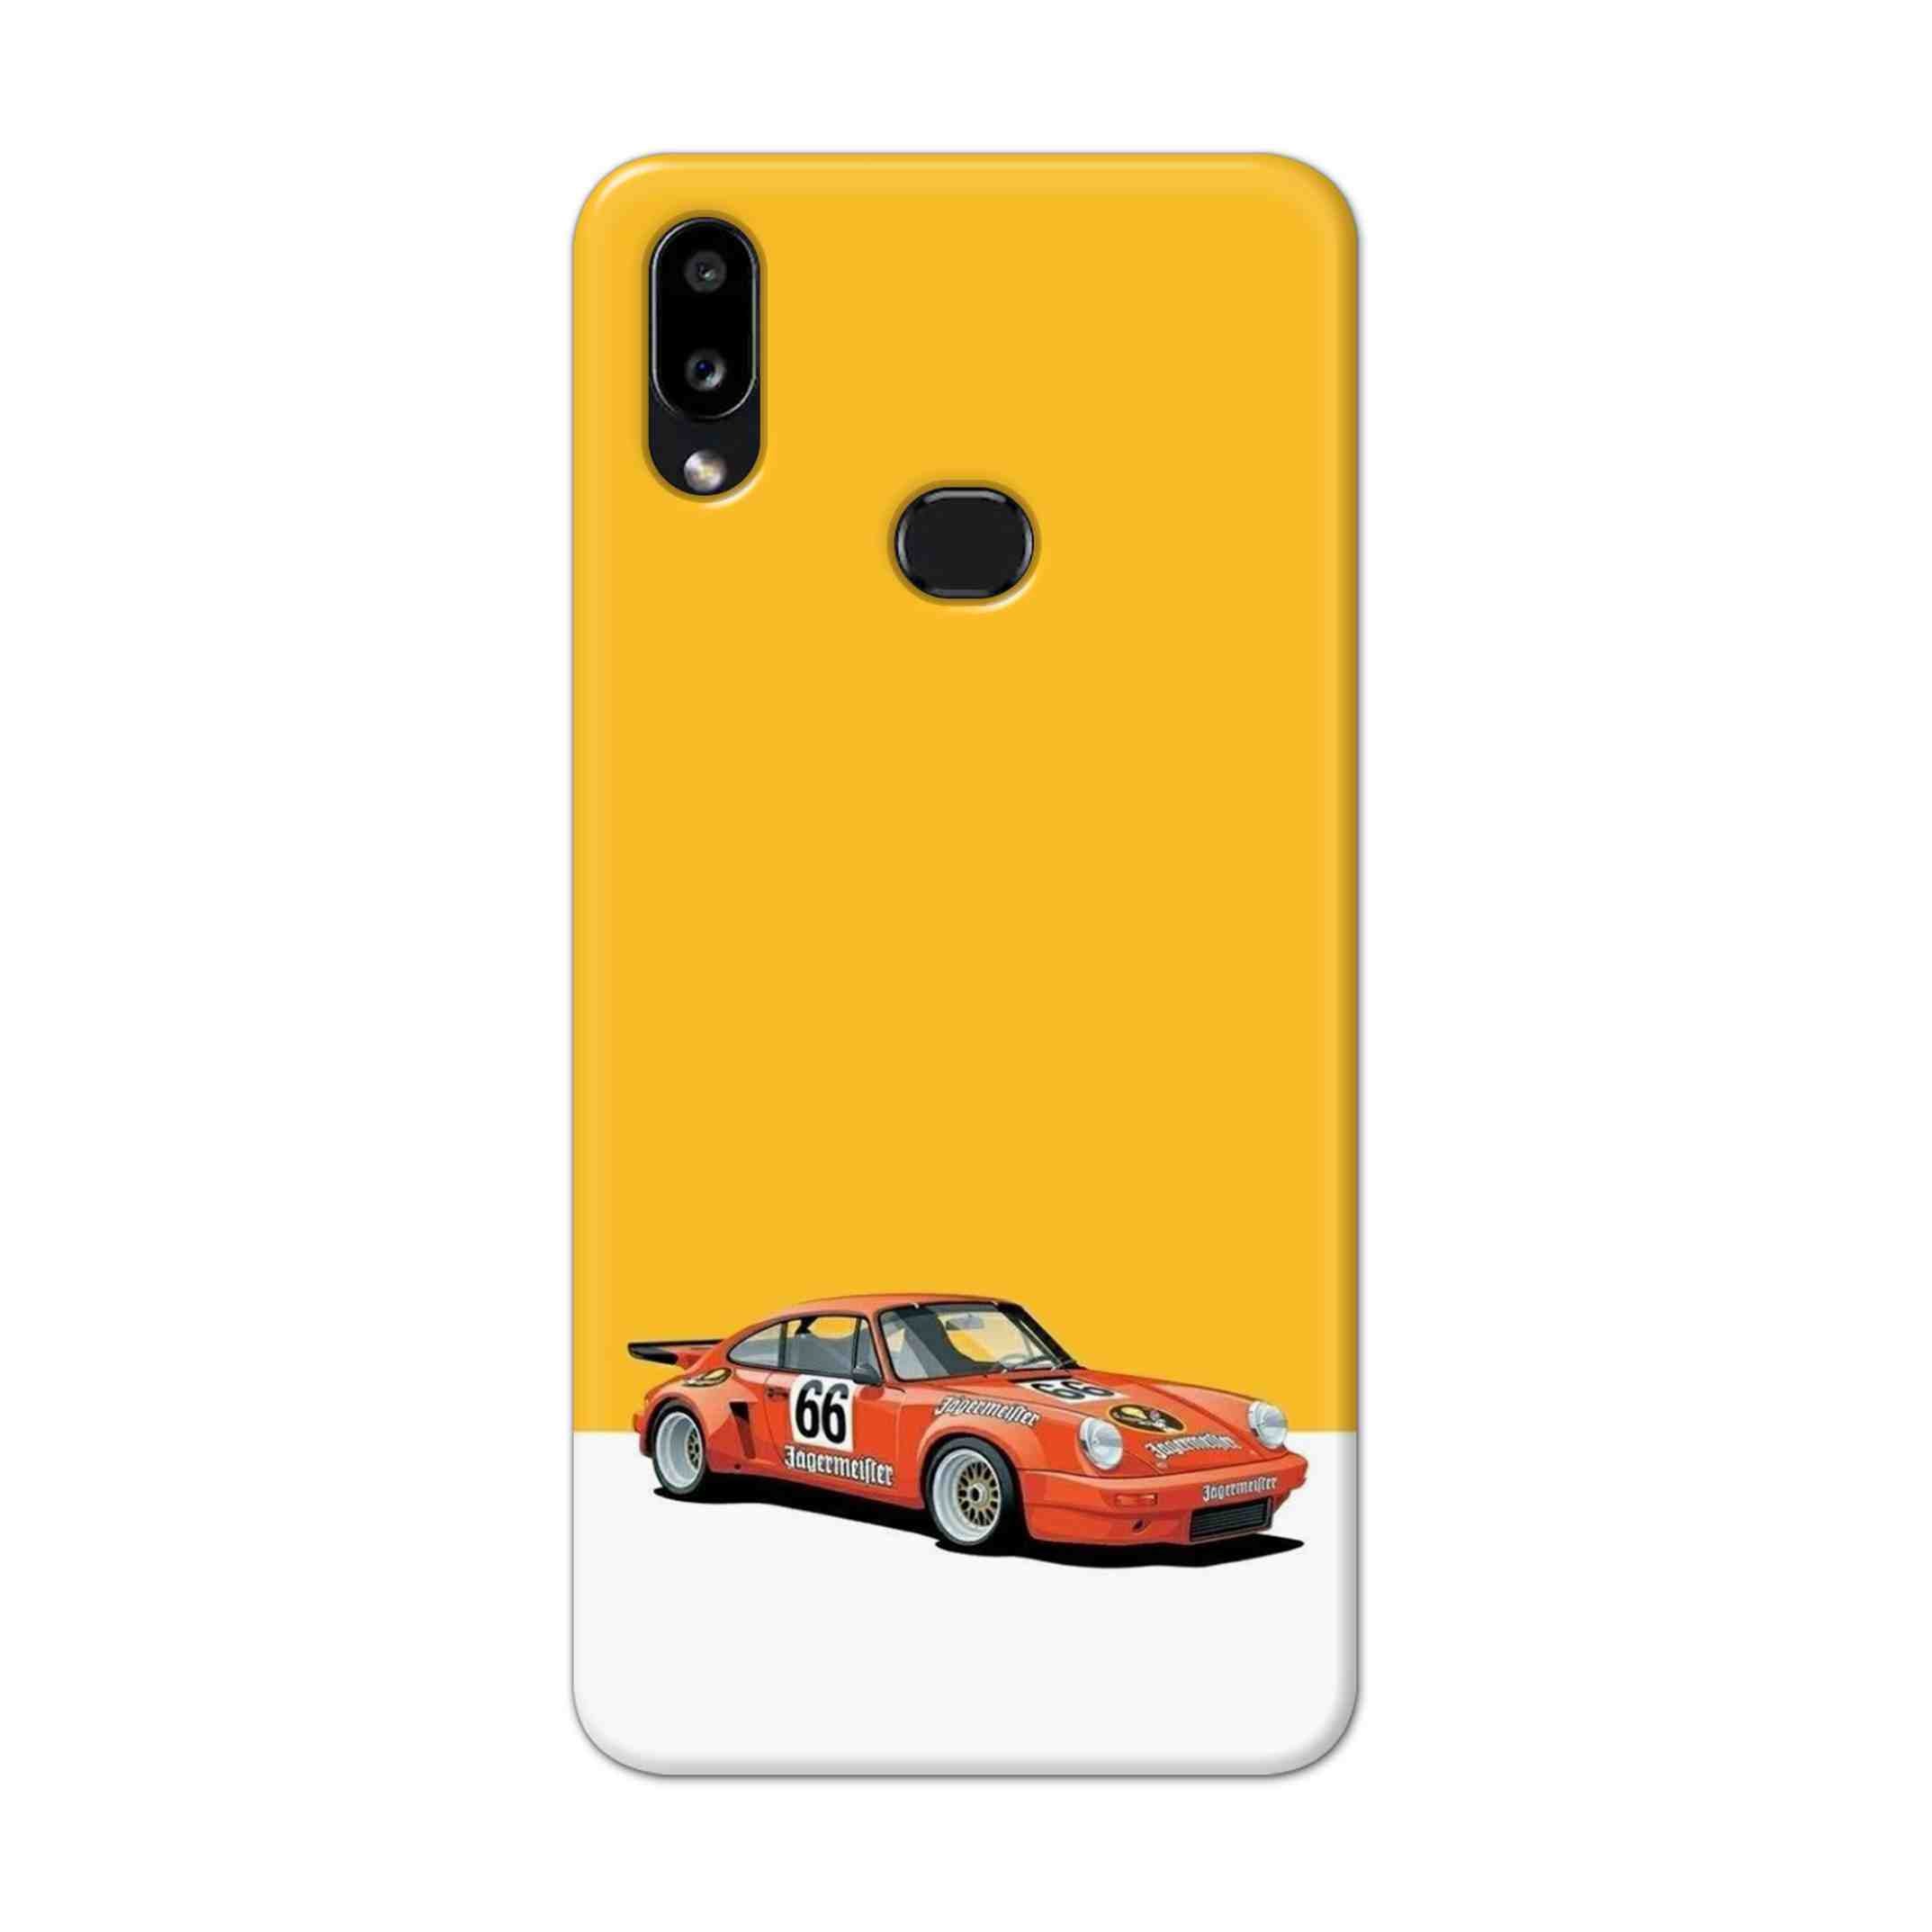 Buy Porche Hard Back Mobile Phone Case Cover For Samsung Galaxy M01s Online